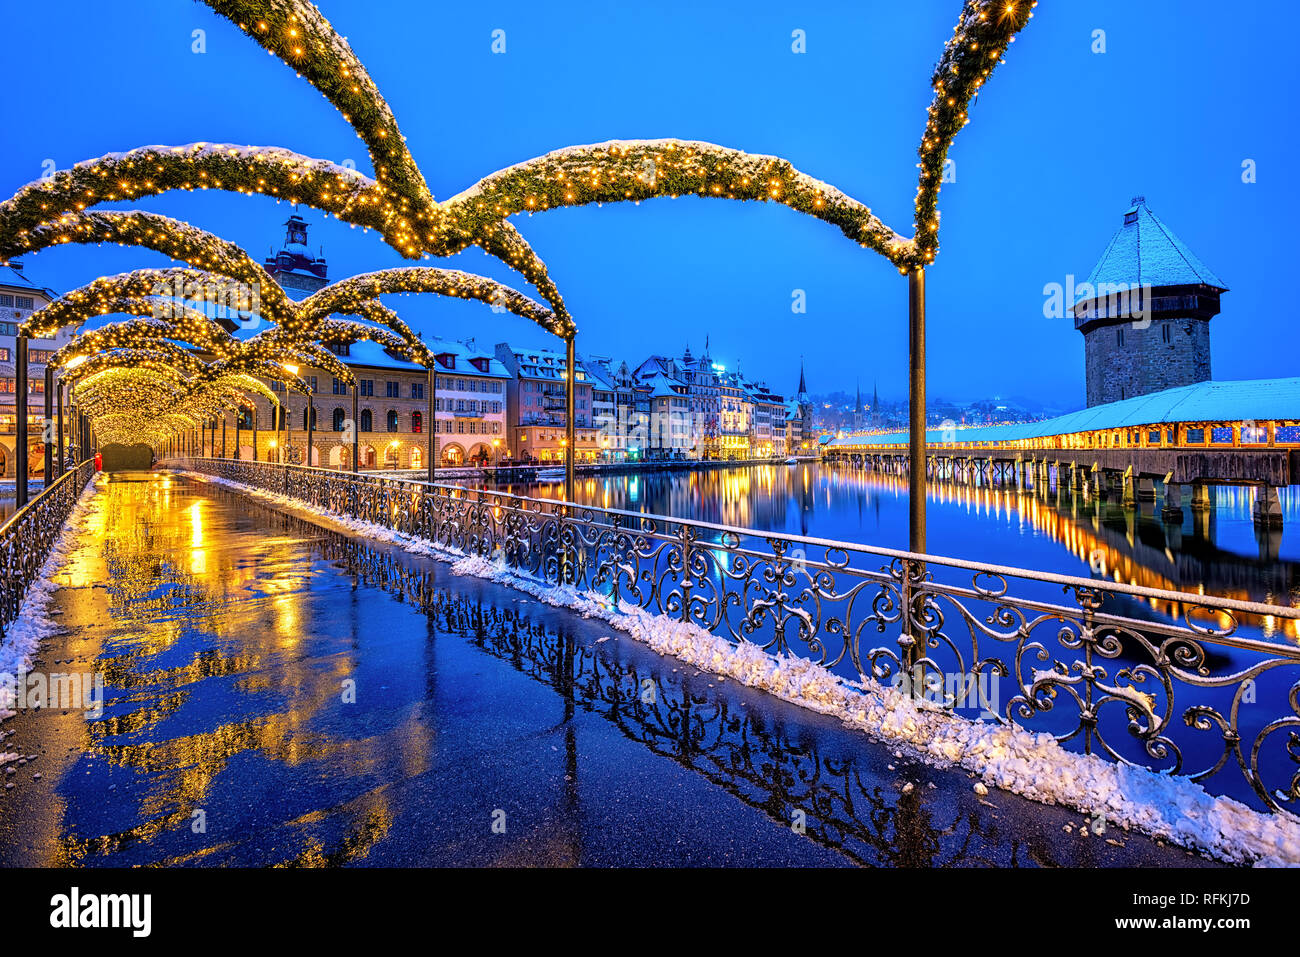 Lucerne Old town, Switzerland, decorated with Christmas lights in winter Stock Photo